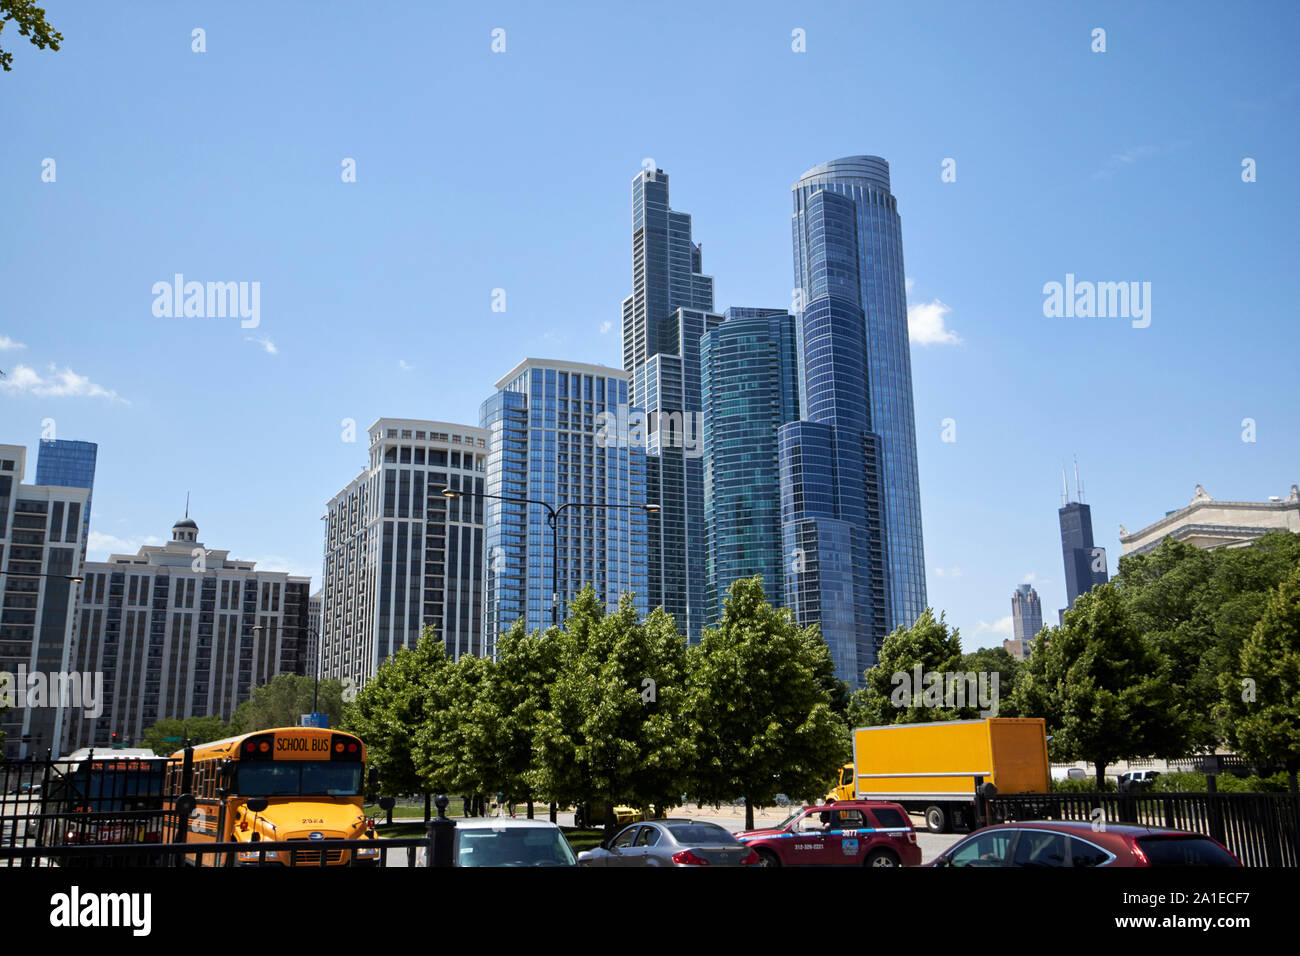 view of museum park residential skyscrapers in central station neighborhood chicago illinois united states of america Stock Photo